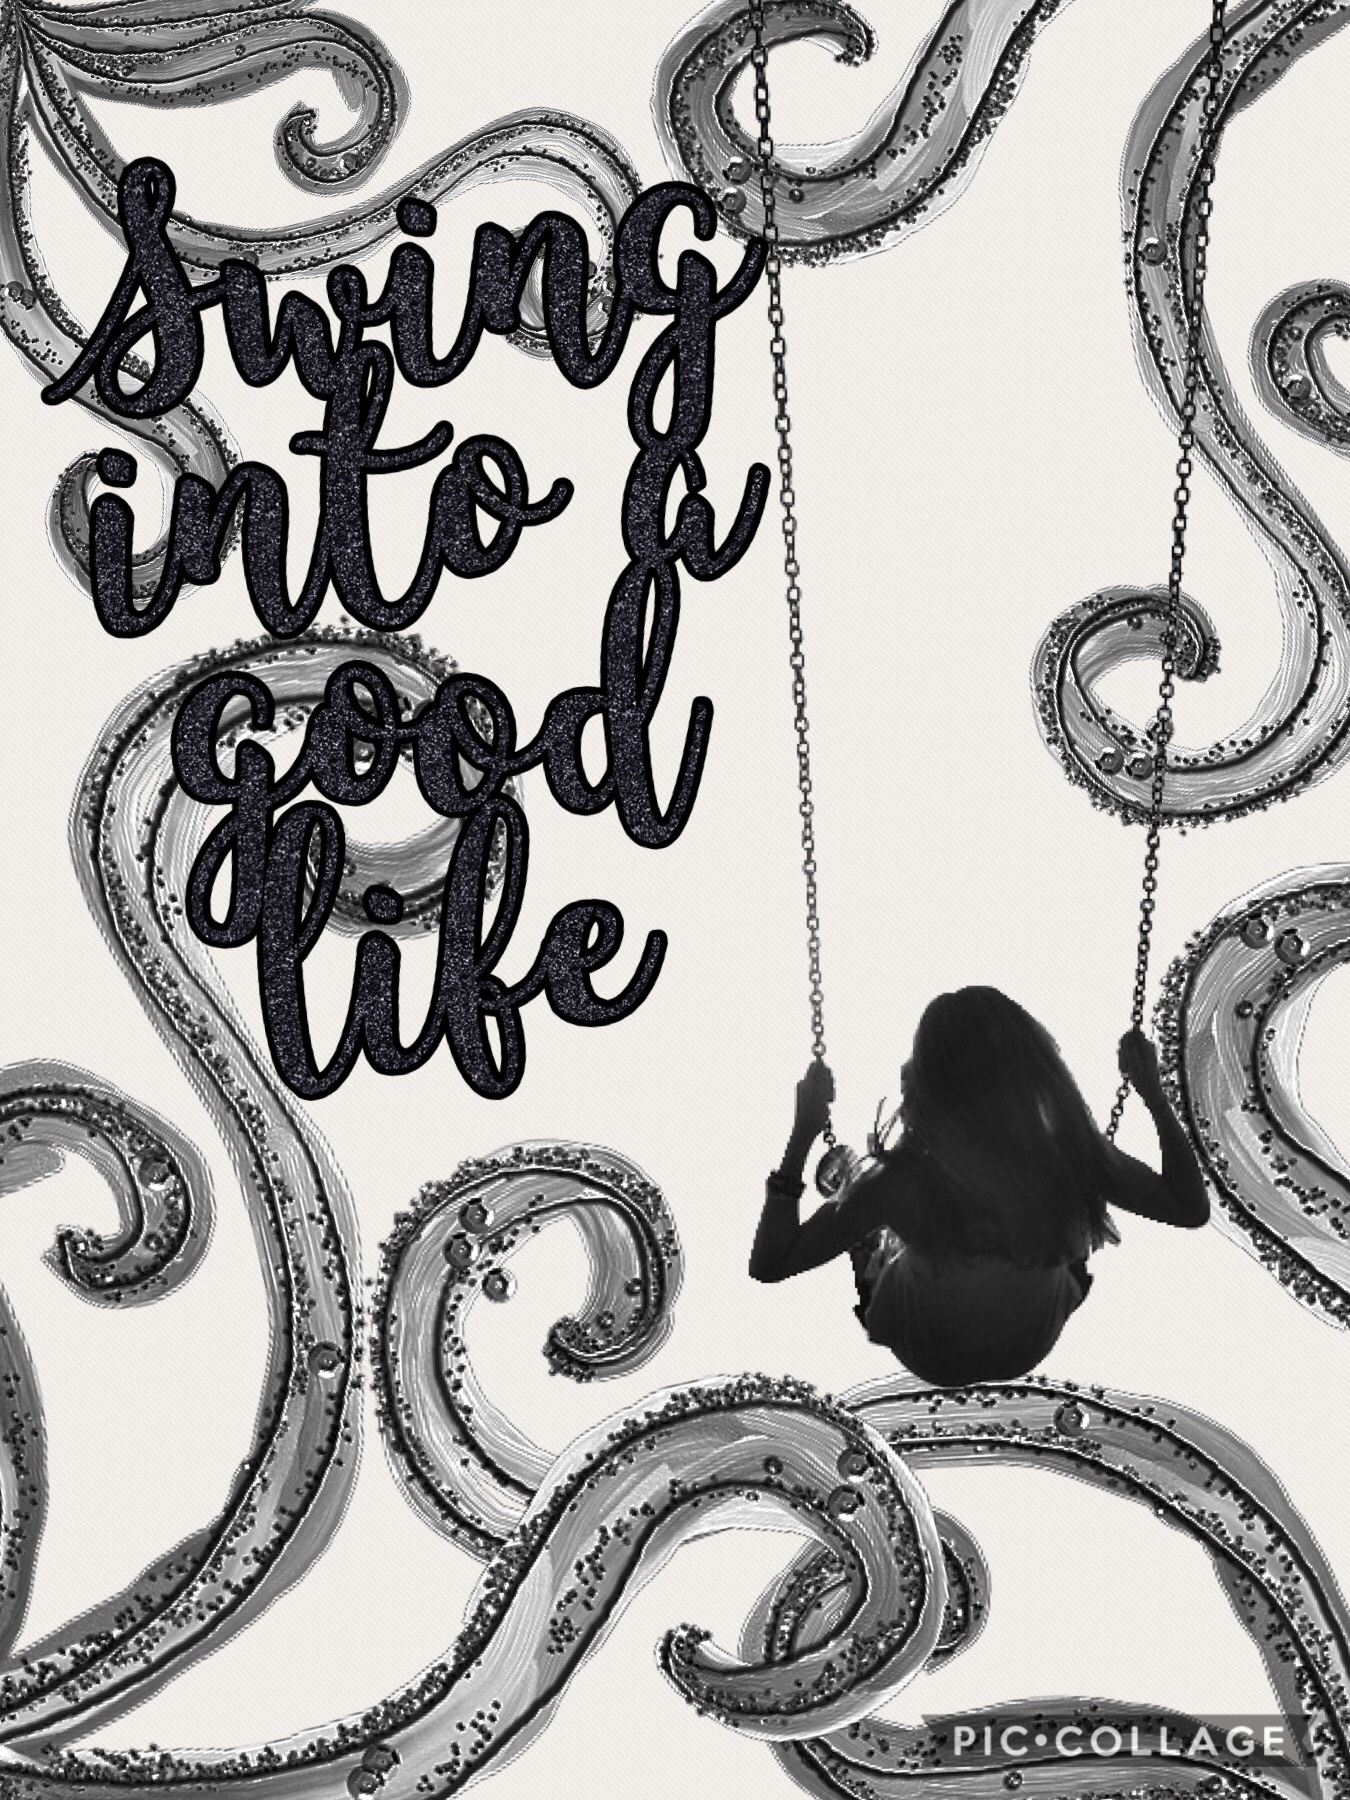 Fixed) swing into a good life